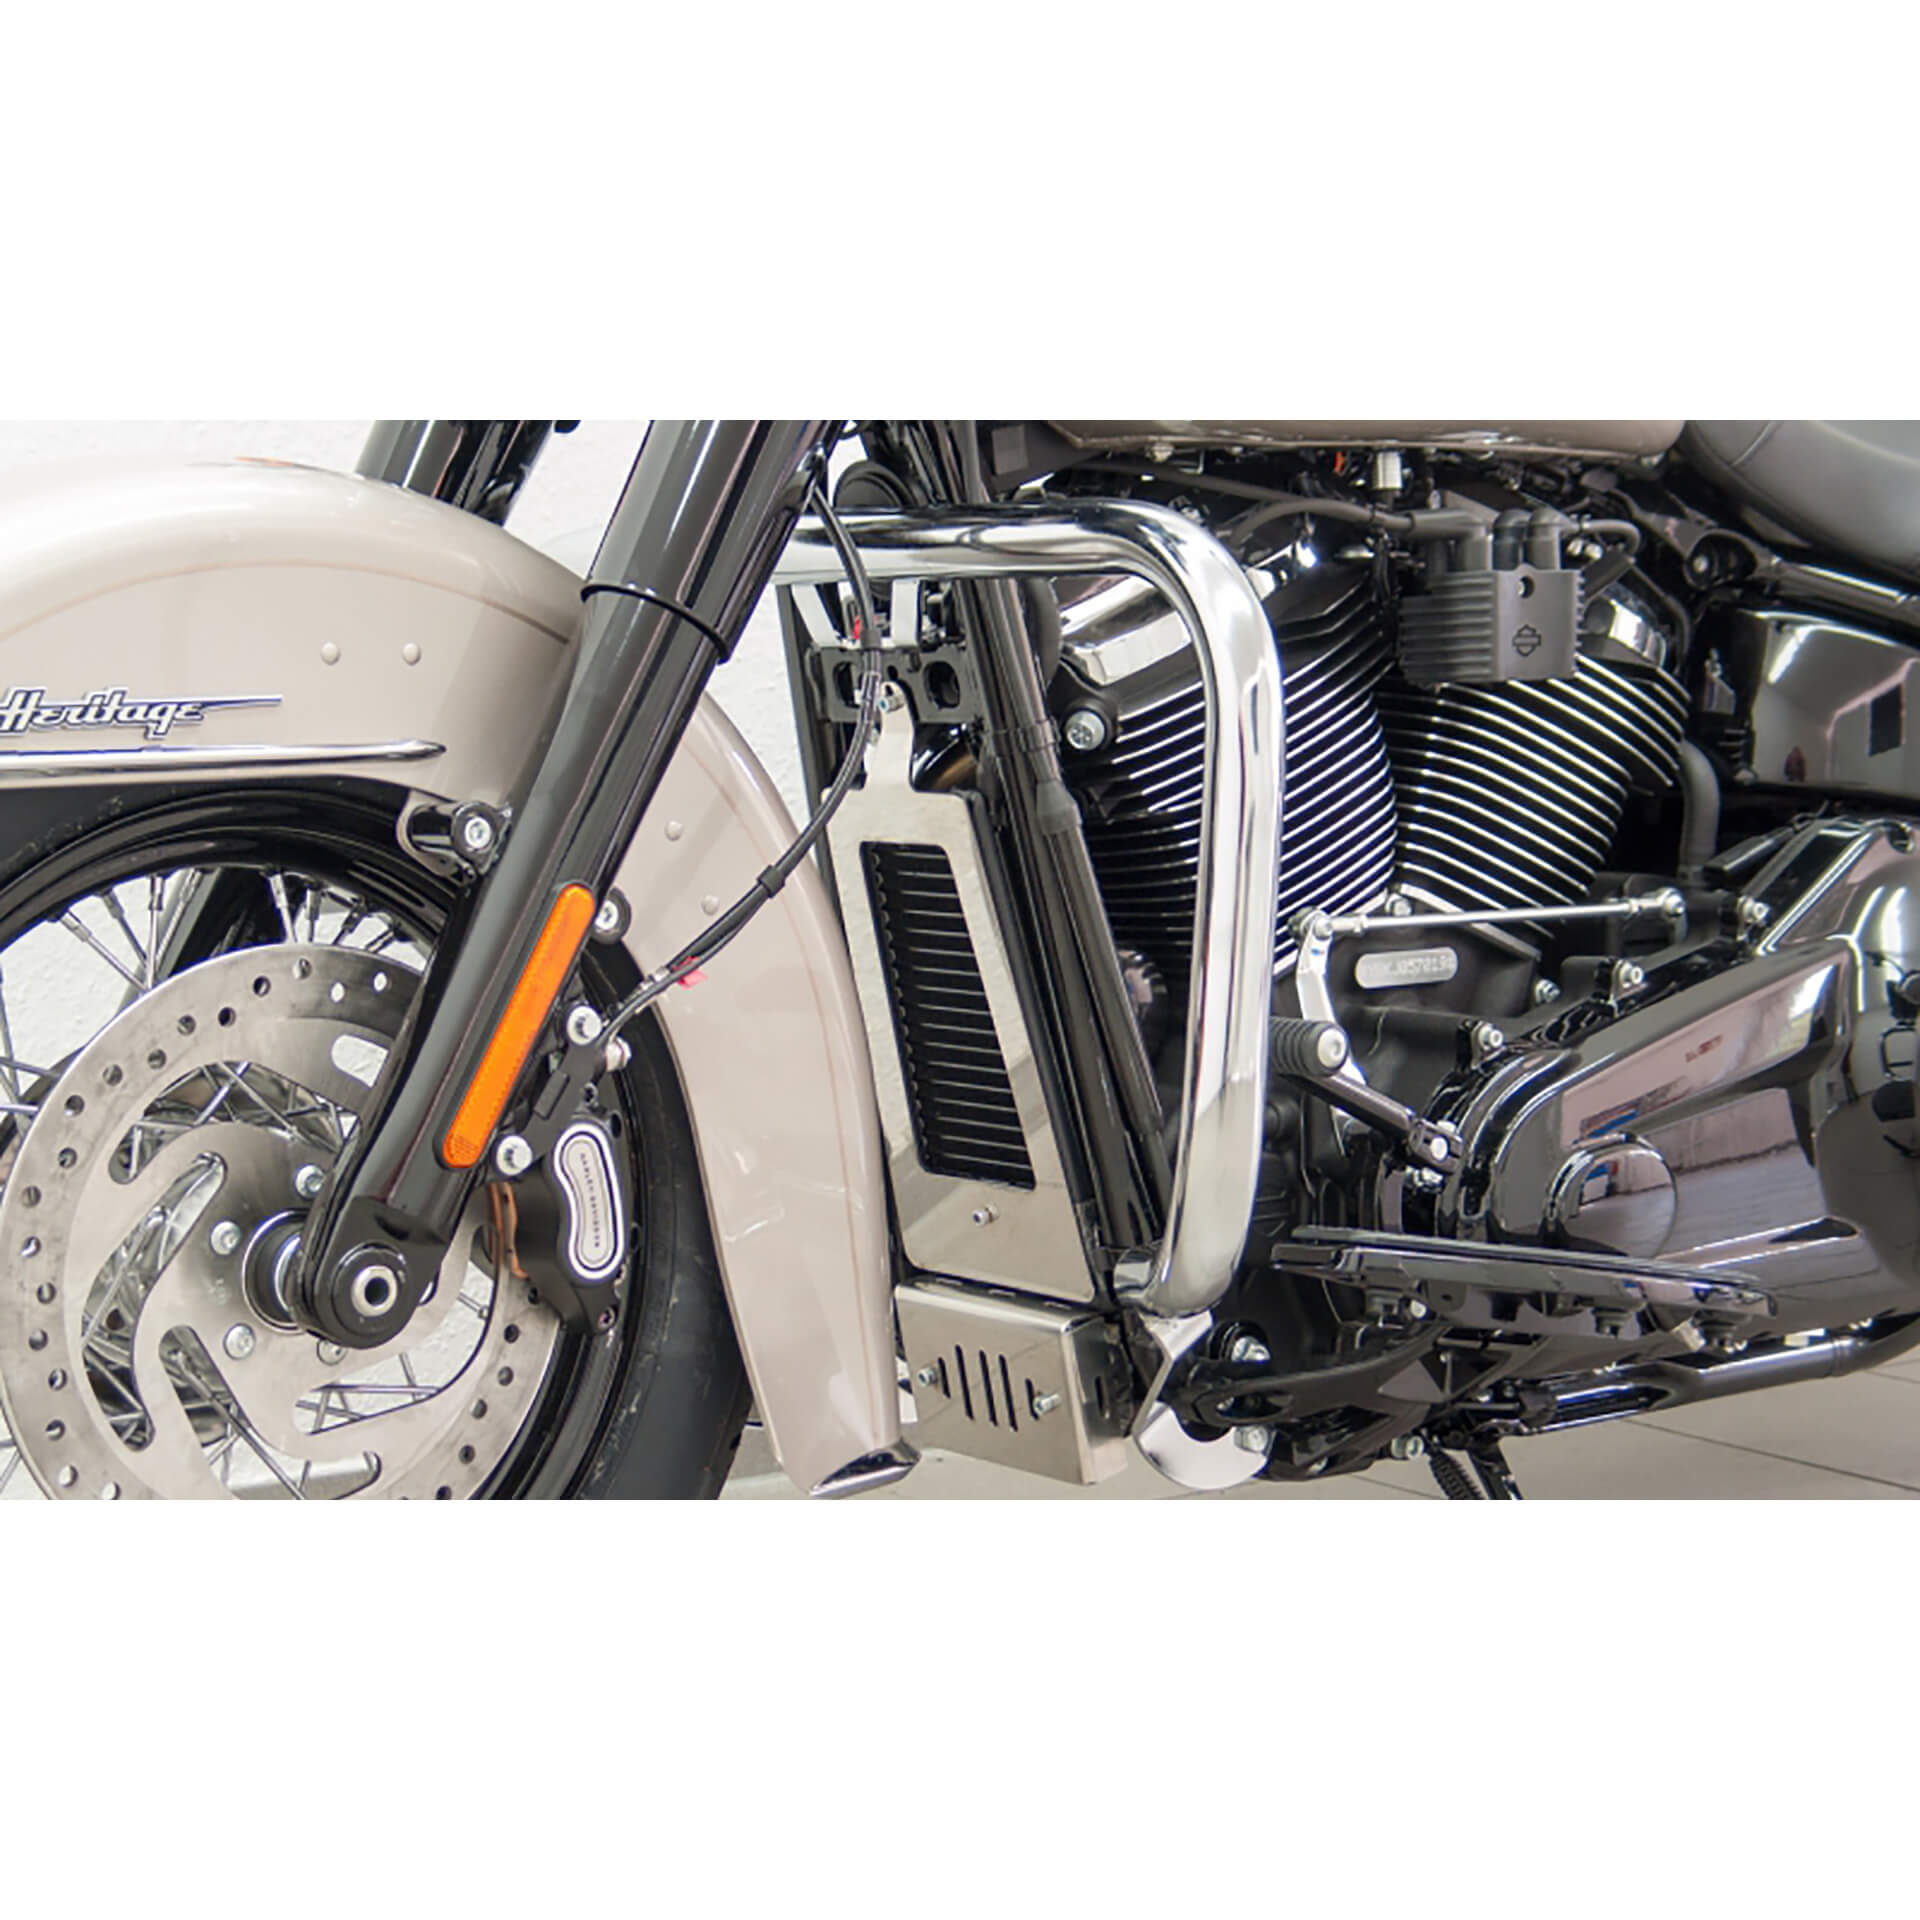 fehling Protection Guard, HD Softail Deluxe, black or silver